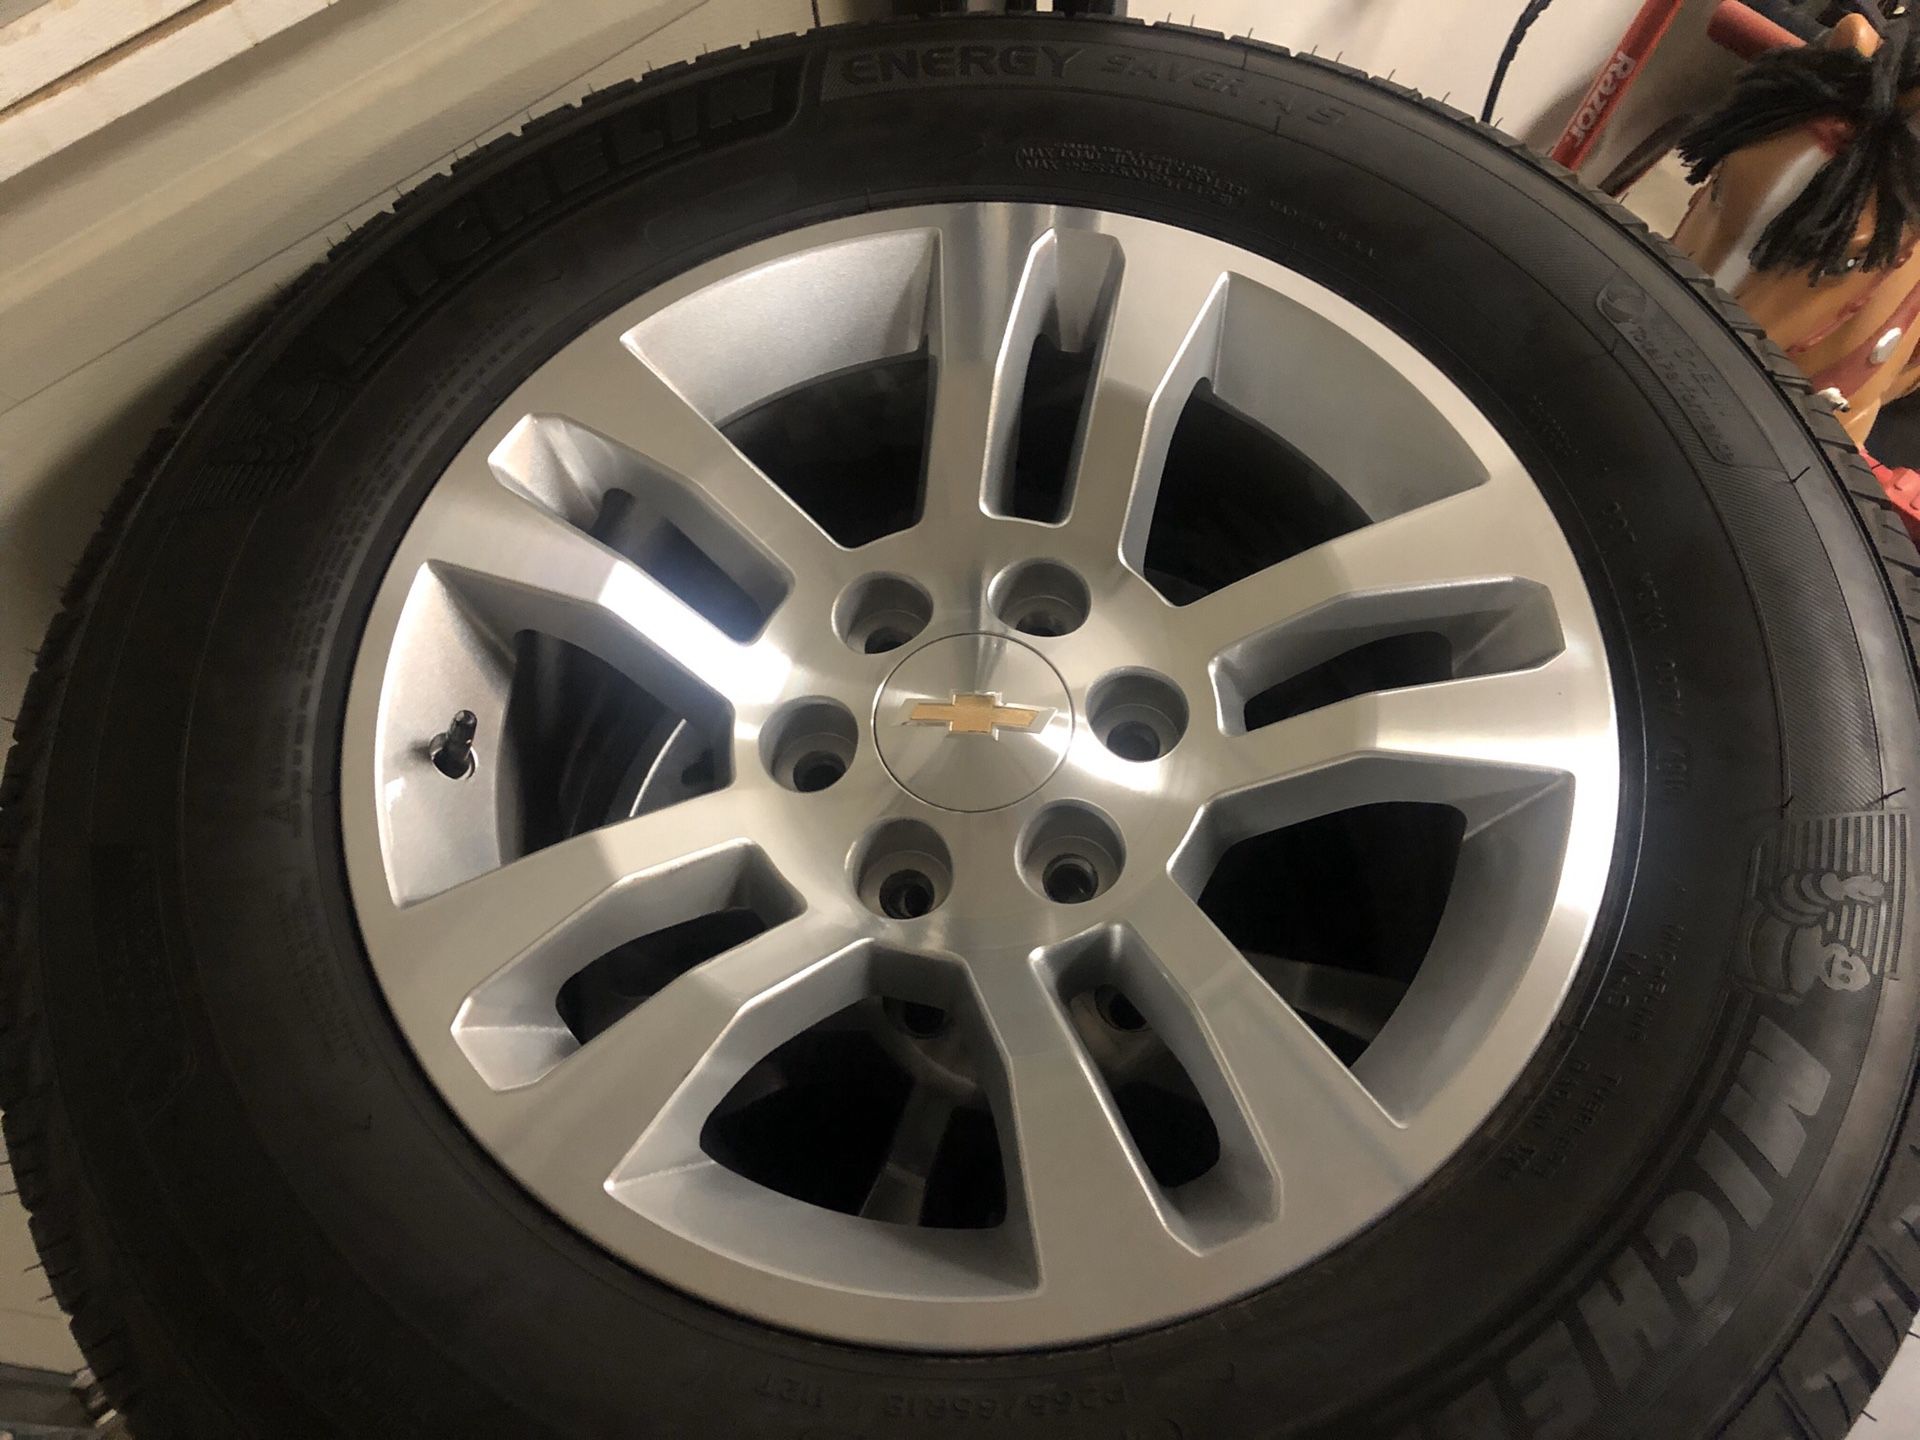 Brand new 2020 18 inch rims and tires for a Chevy Tahoe